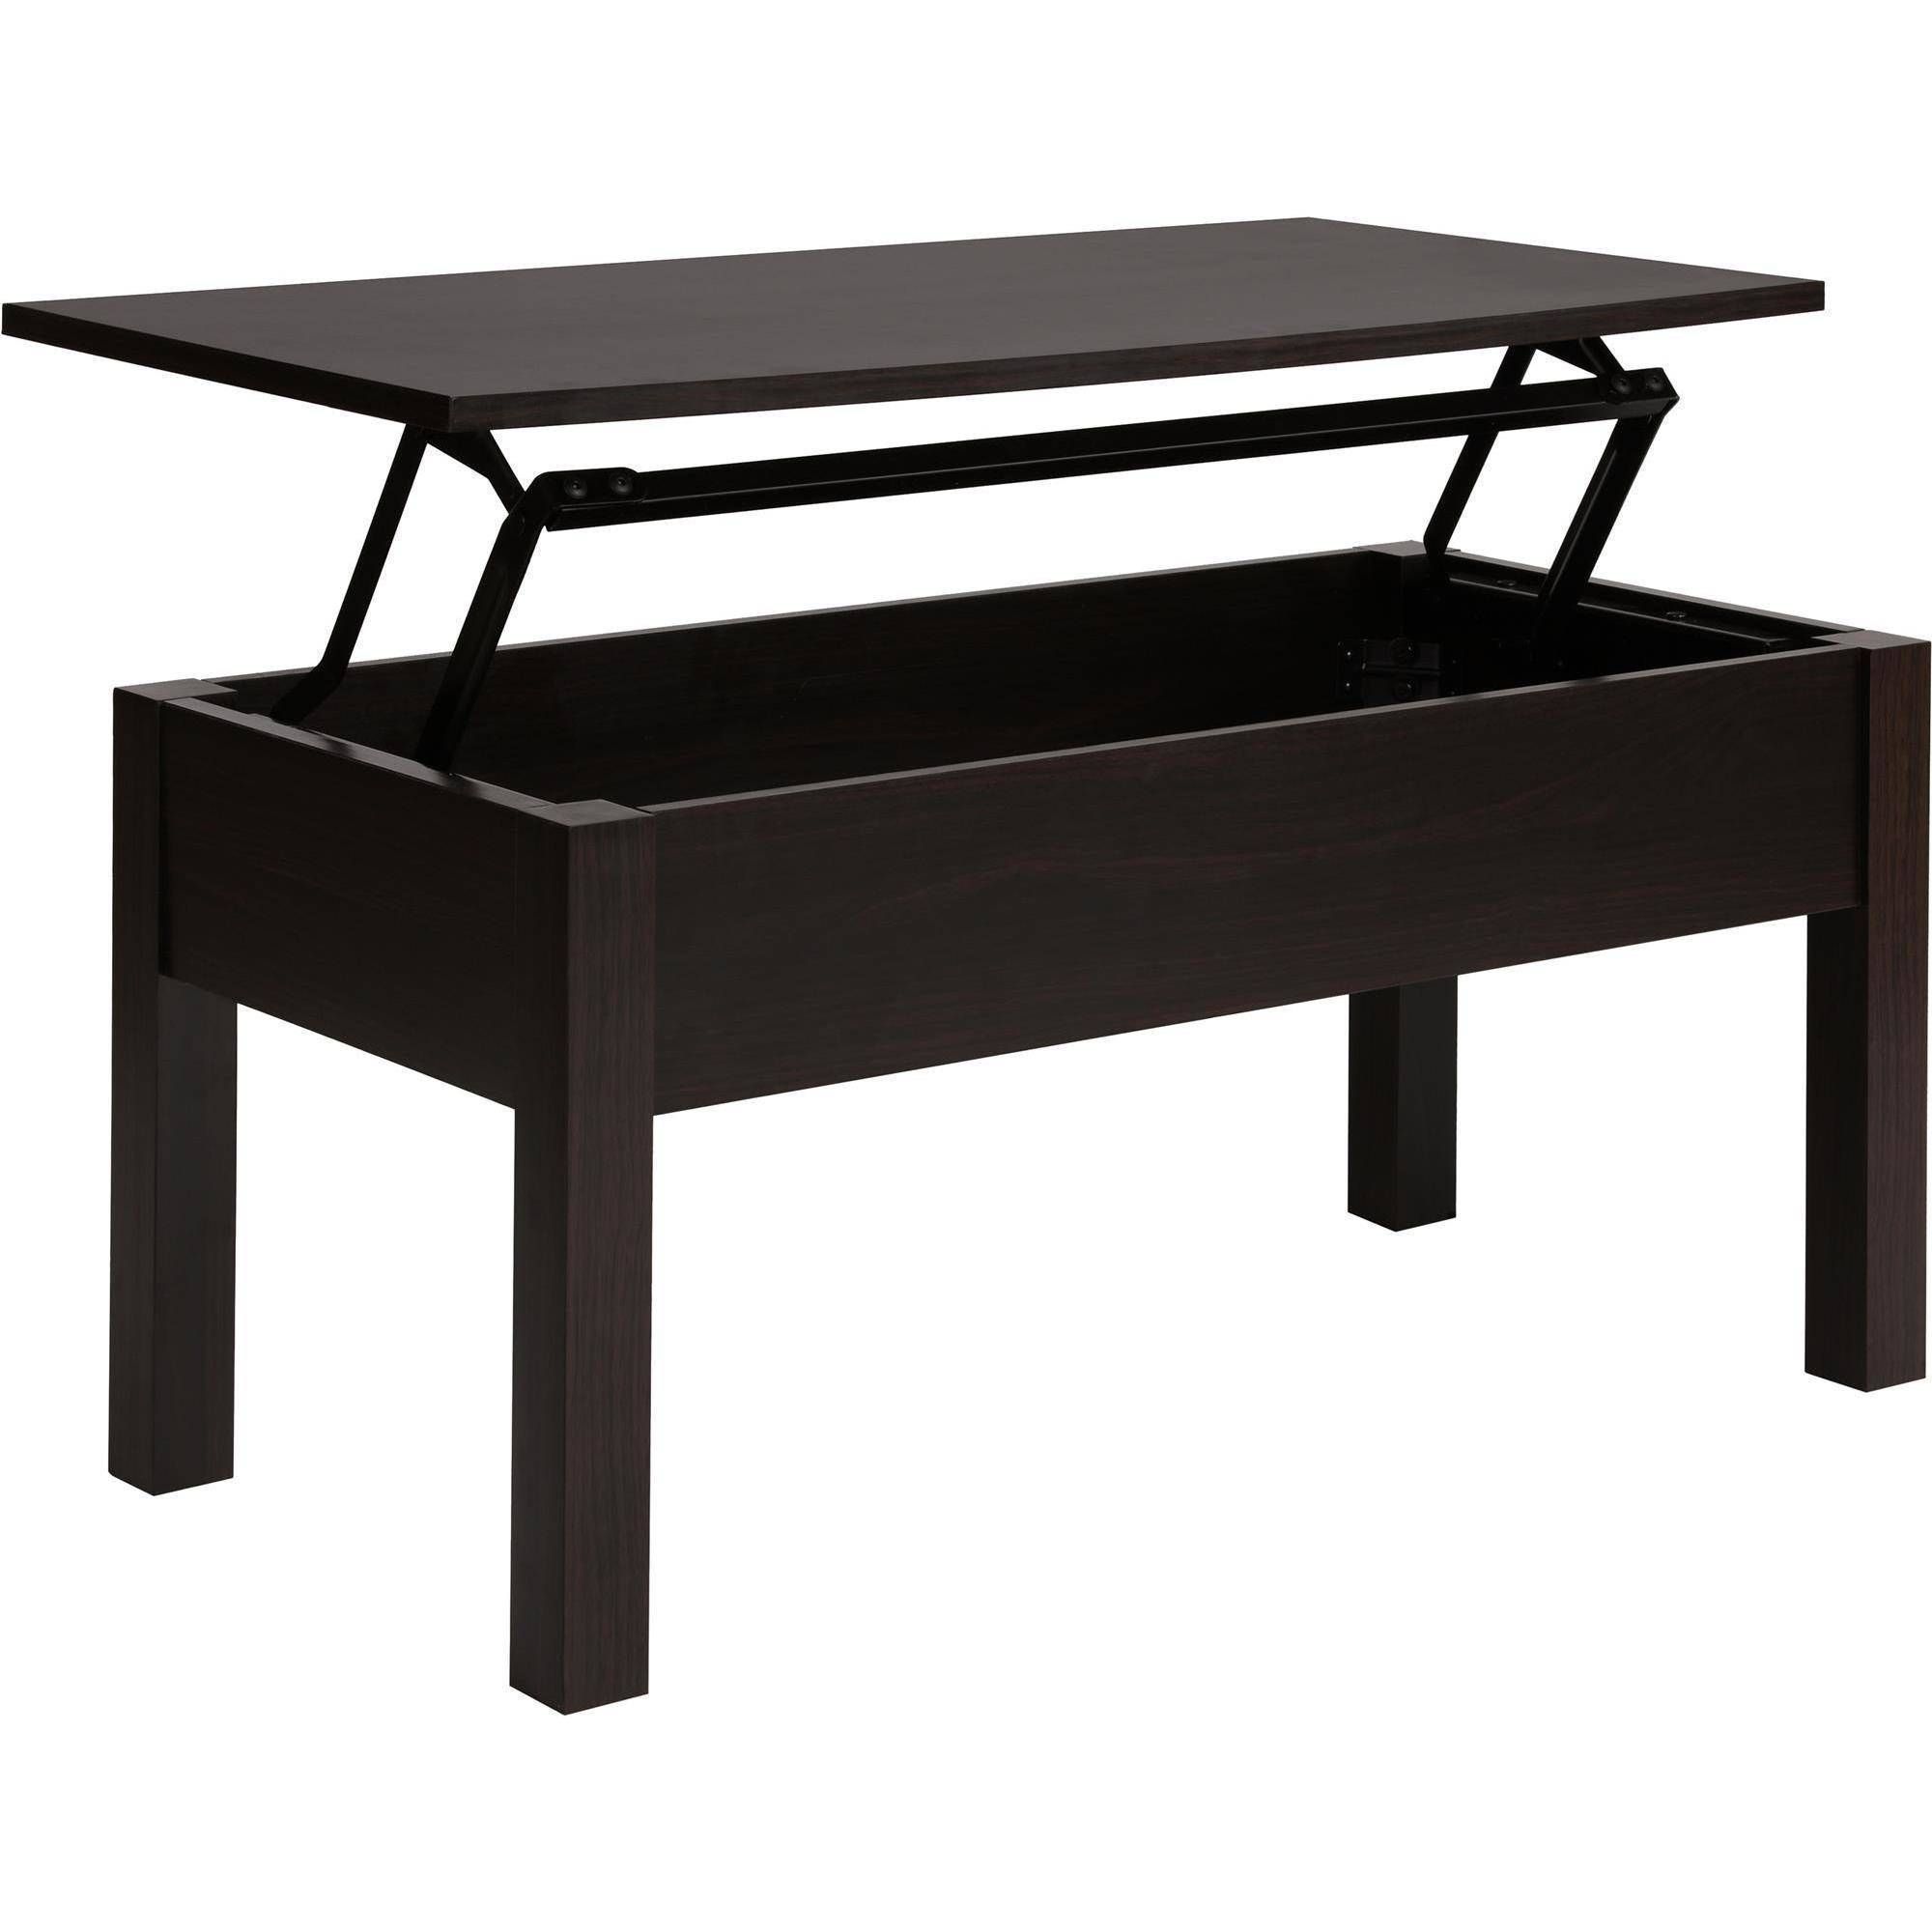 Mainstays Lift Top Coffee Table, Multiple Colors – Walmart Throughout Pull Up Coffee Tables (View 10 of 30)